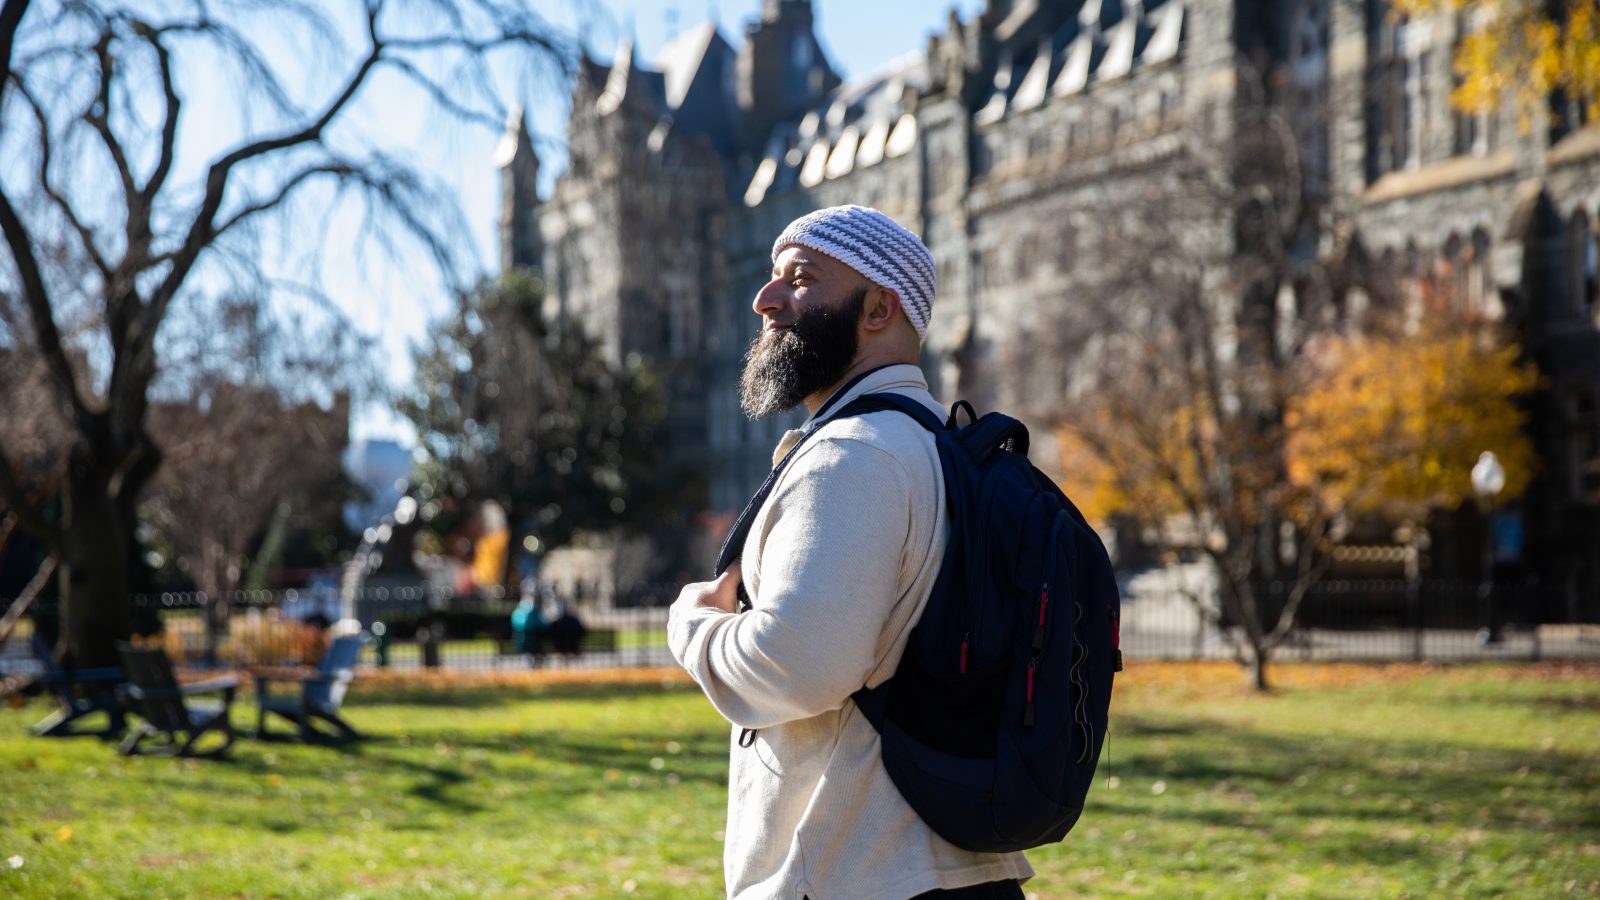 Adnan Syed, a program associate in the Prisons and Justice Initiative, wears a cream-colored sweater, a blue-and-white-striped kufi, or Muslim prayer hat, and a black backpack. He stands on the front lawn of Georgetown with Healy Hall, a Gothic-style building behind him and looks forward.